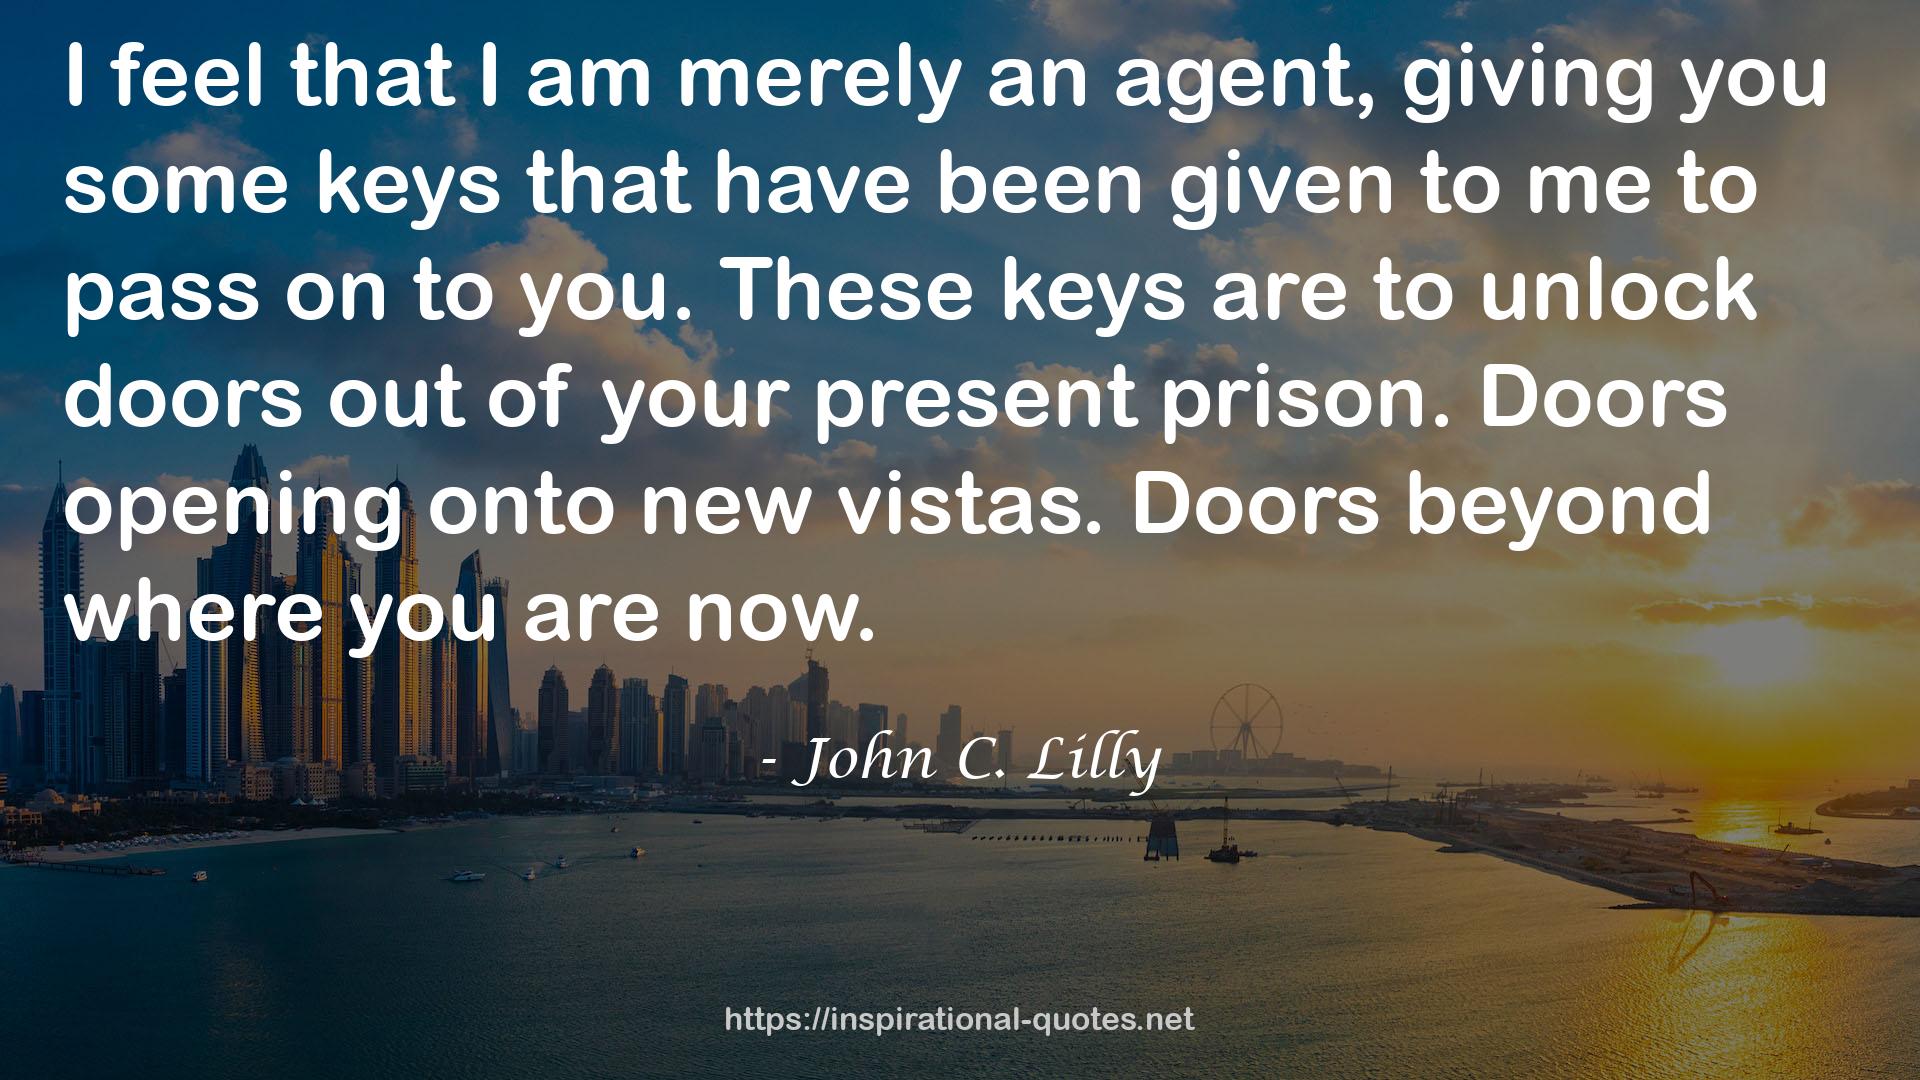 John C. Lilly QUOTES